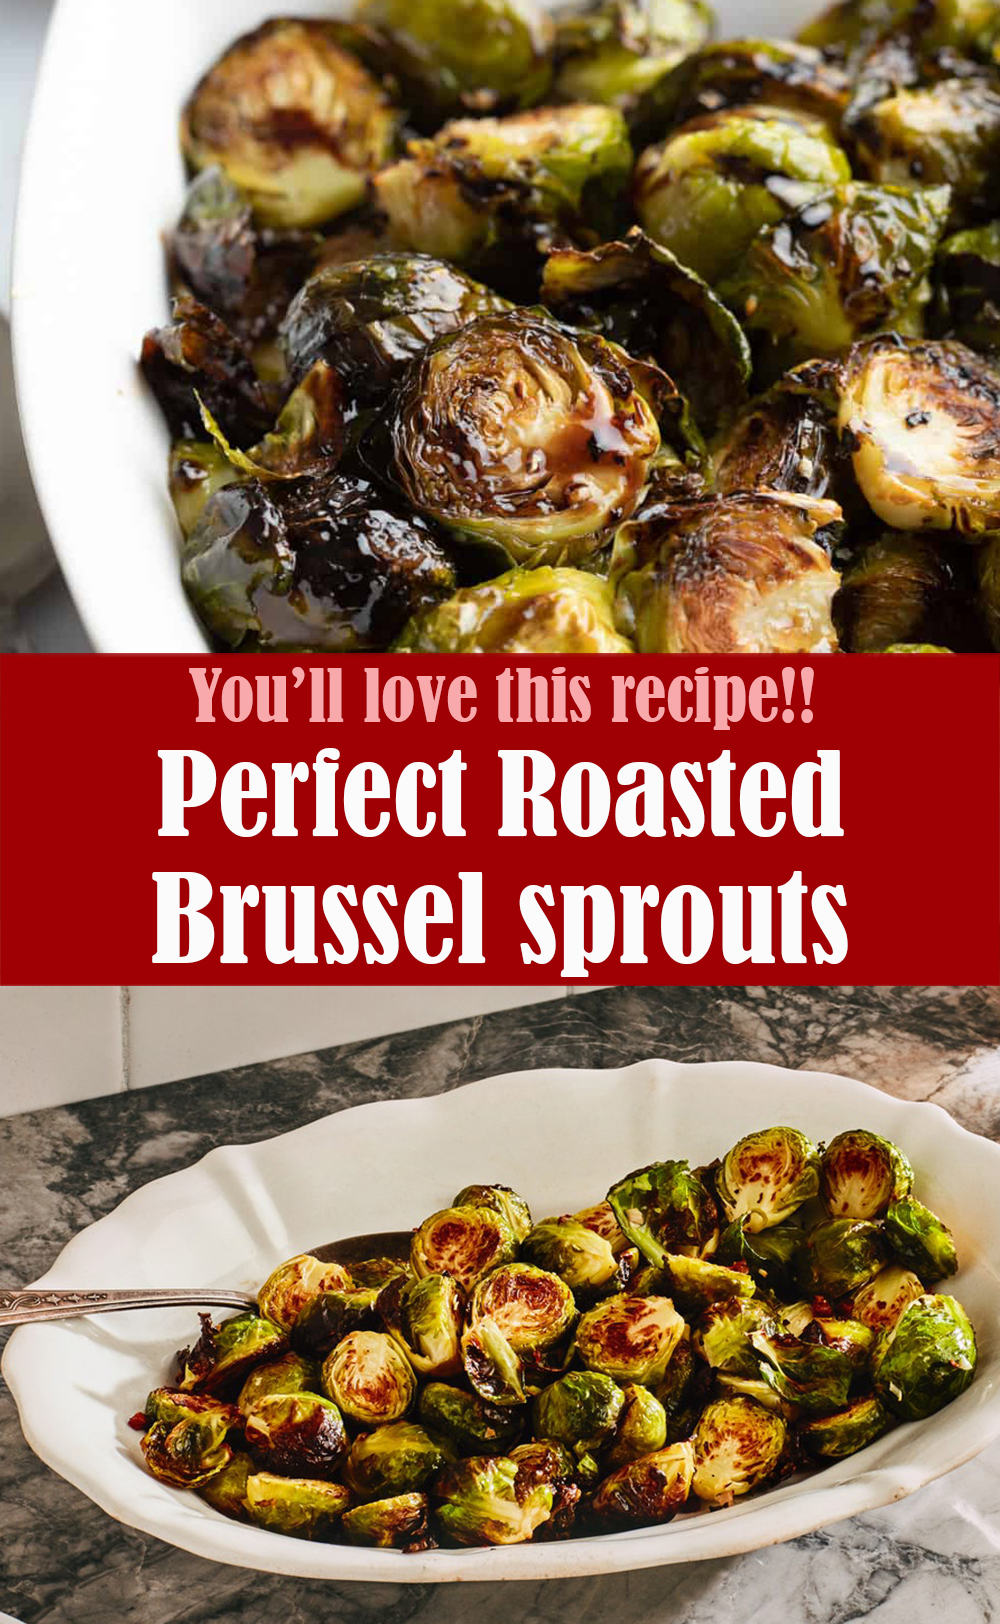 Perfect Roasted Brussel sprouts